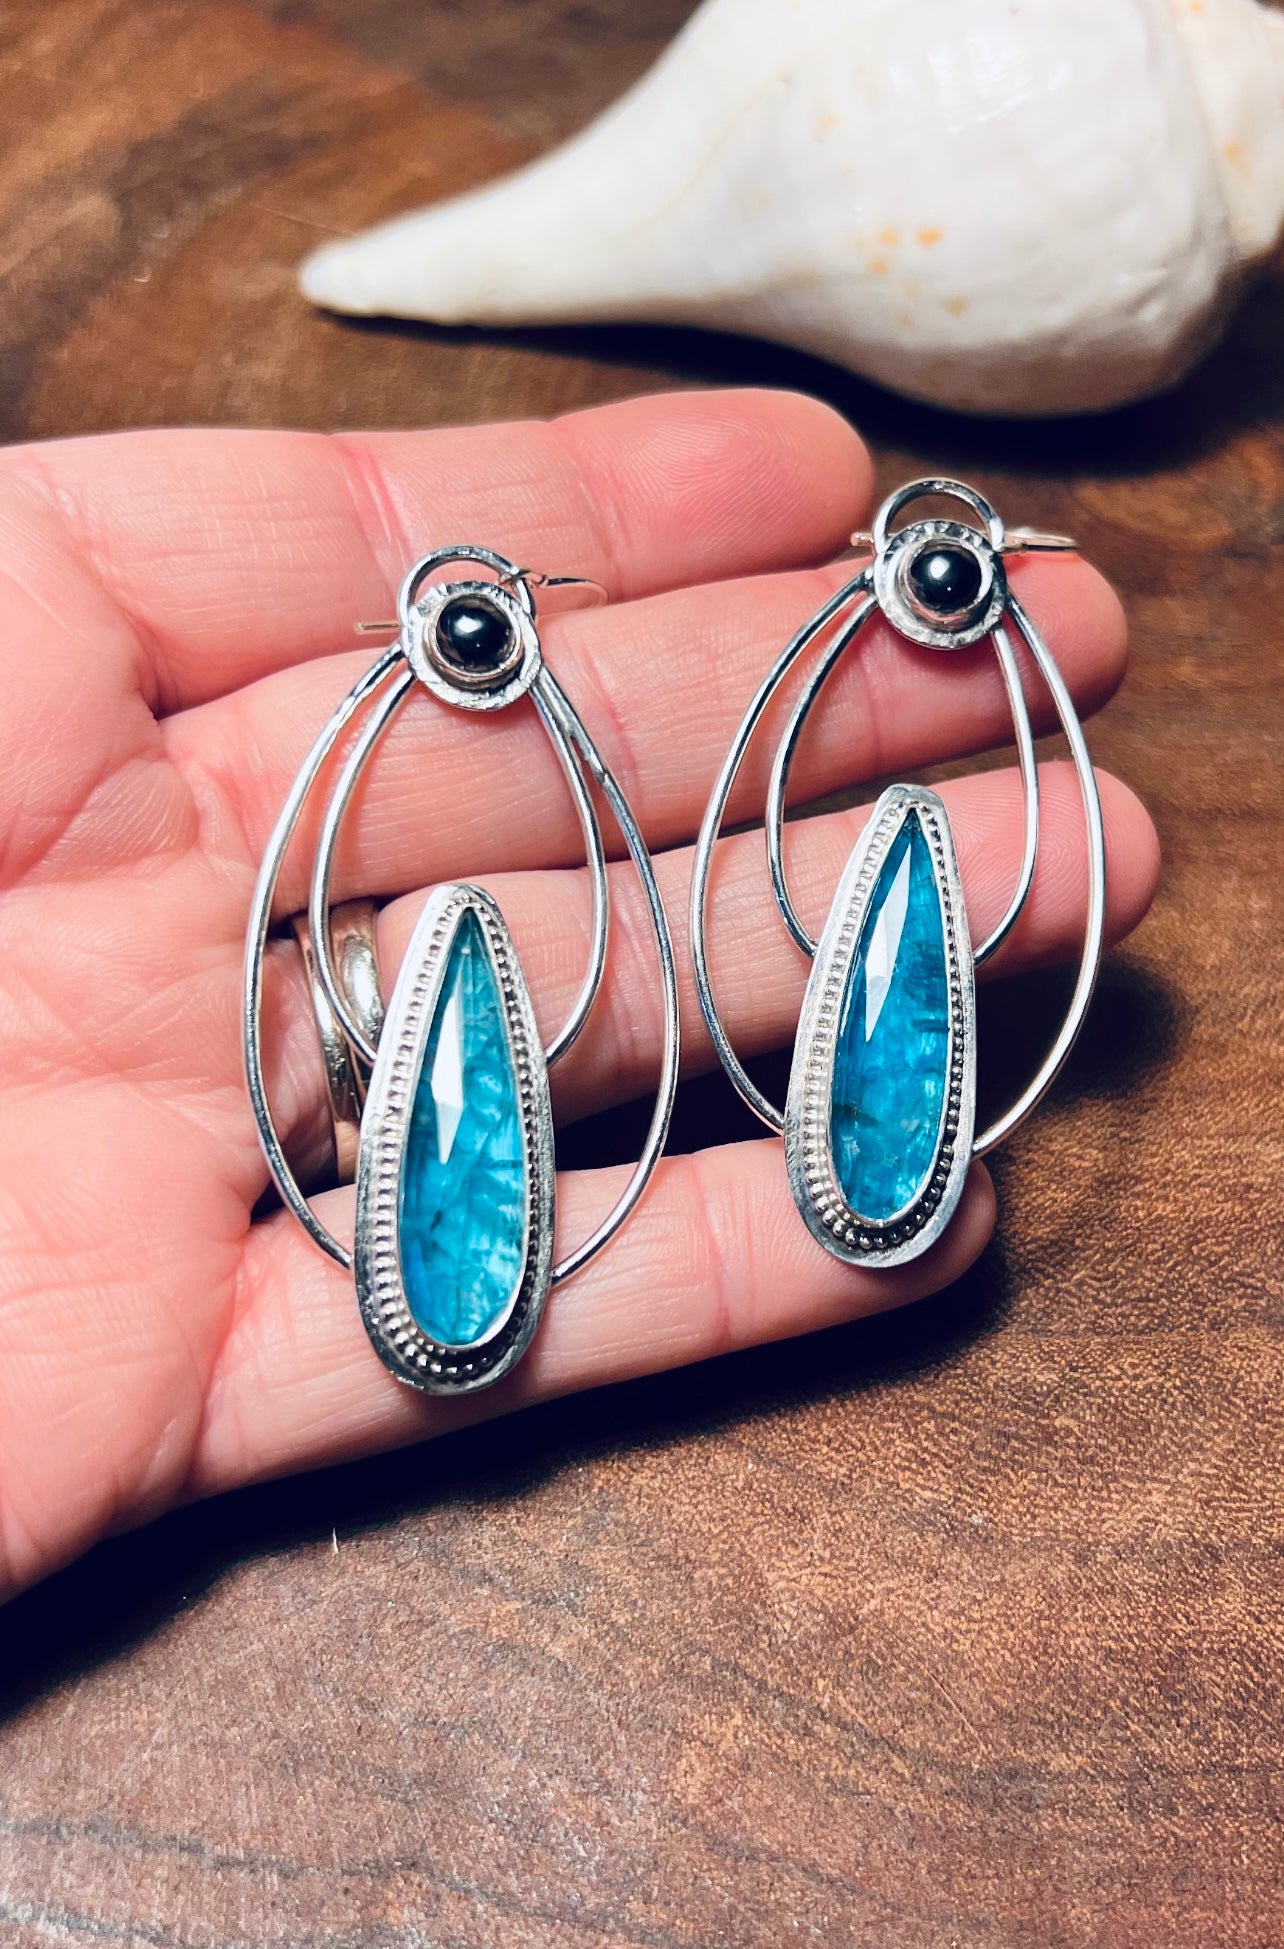 Neon Apatite Doublet and Hematite Sterling Silver Earrings